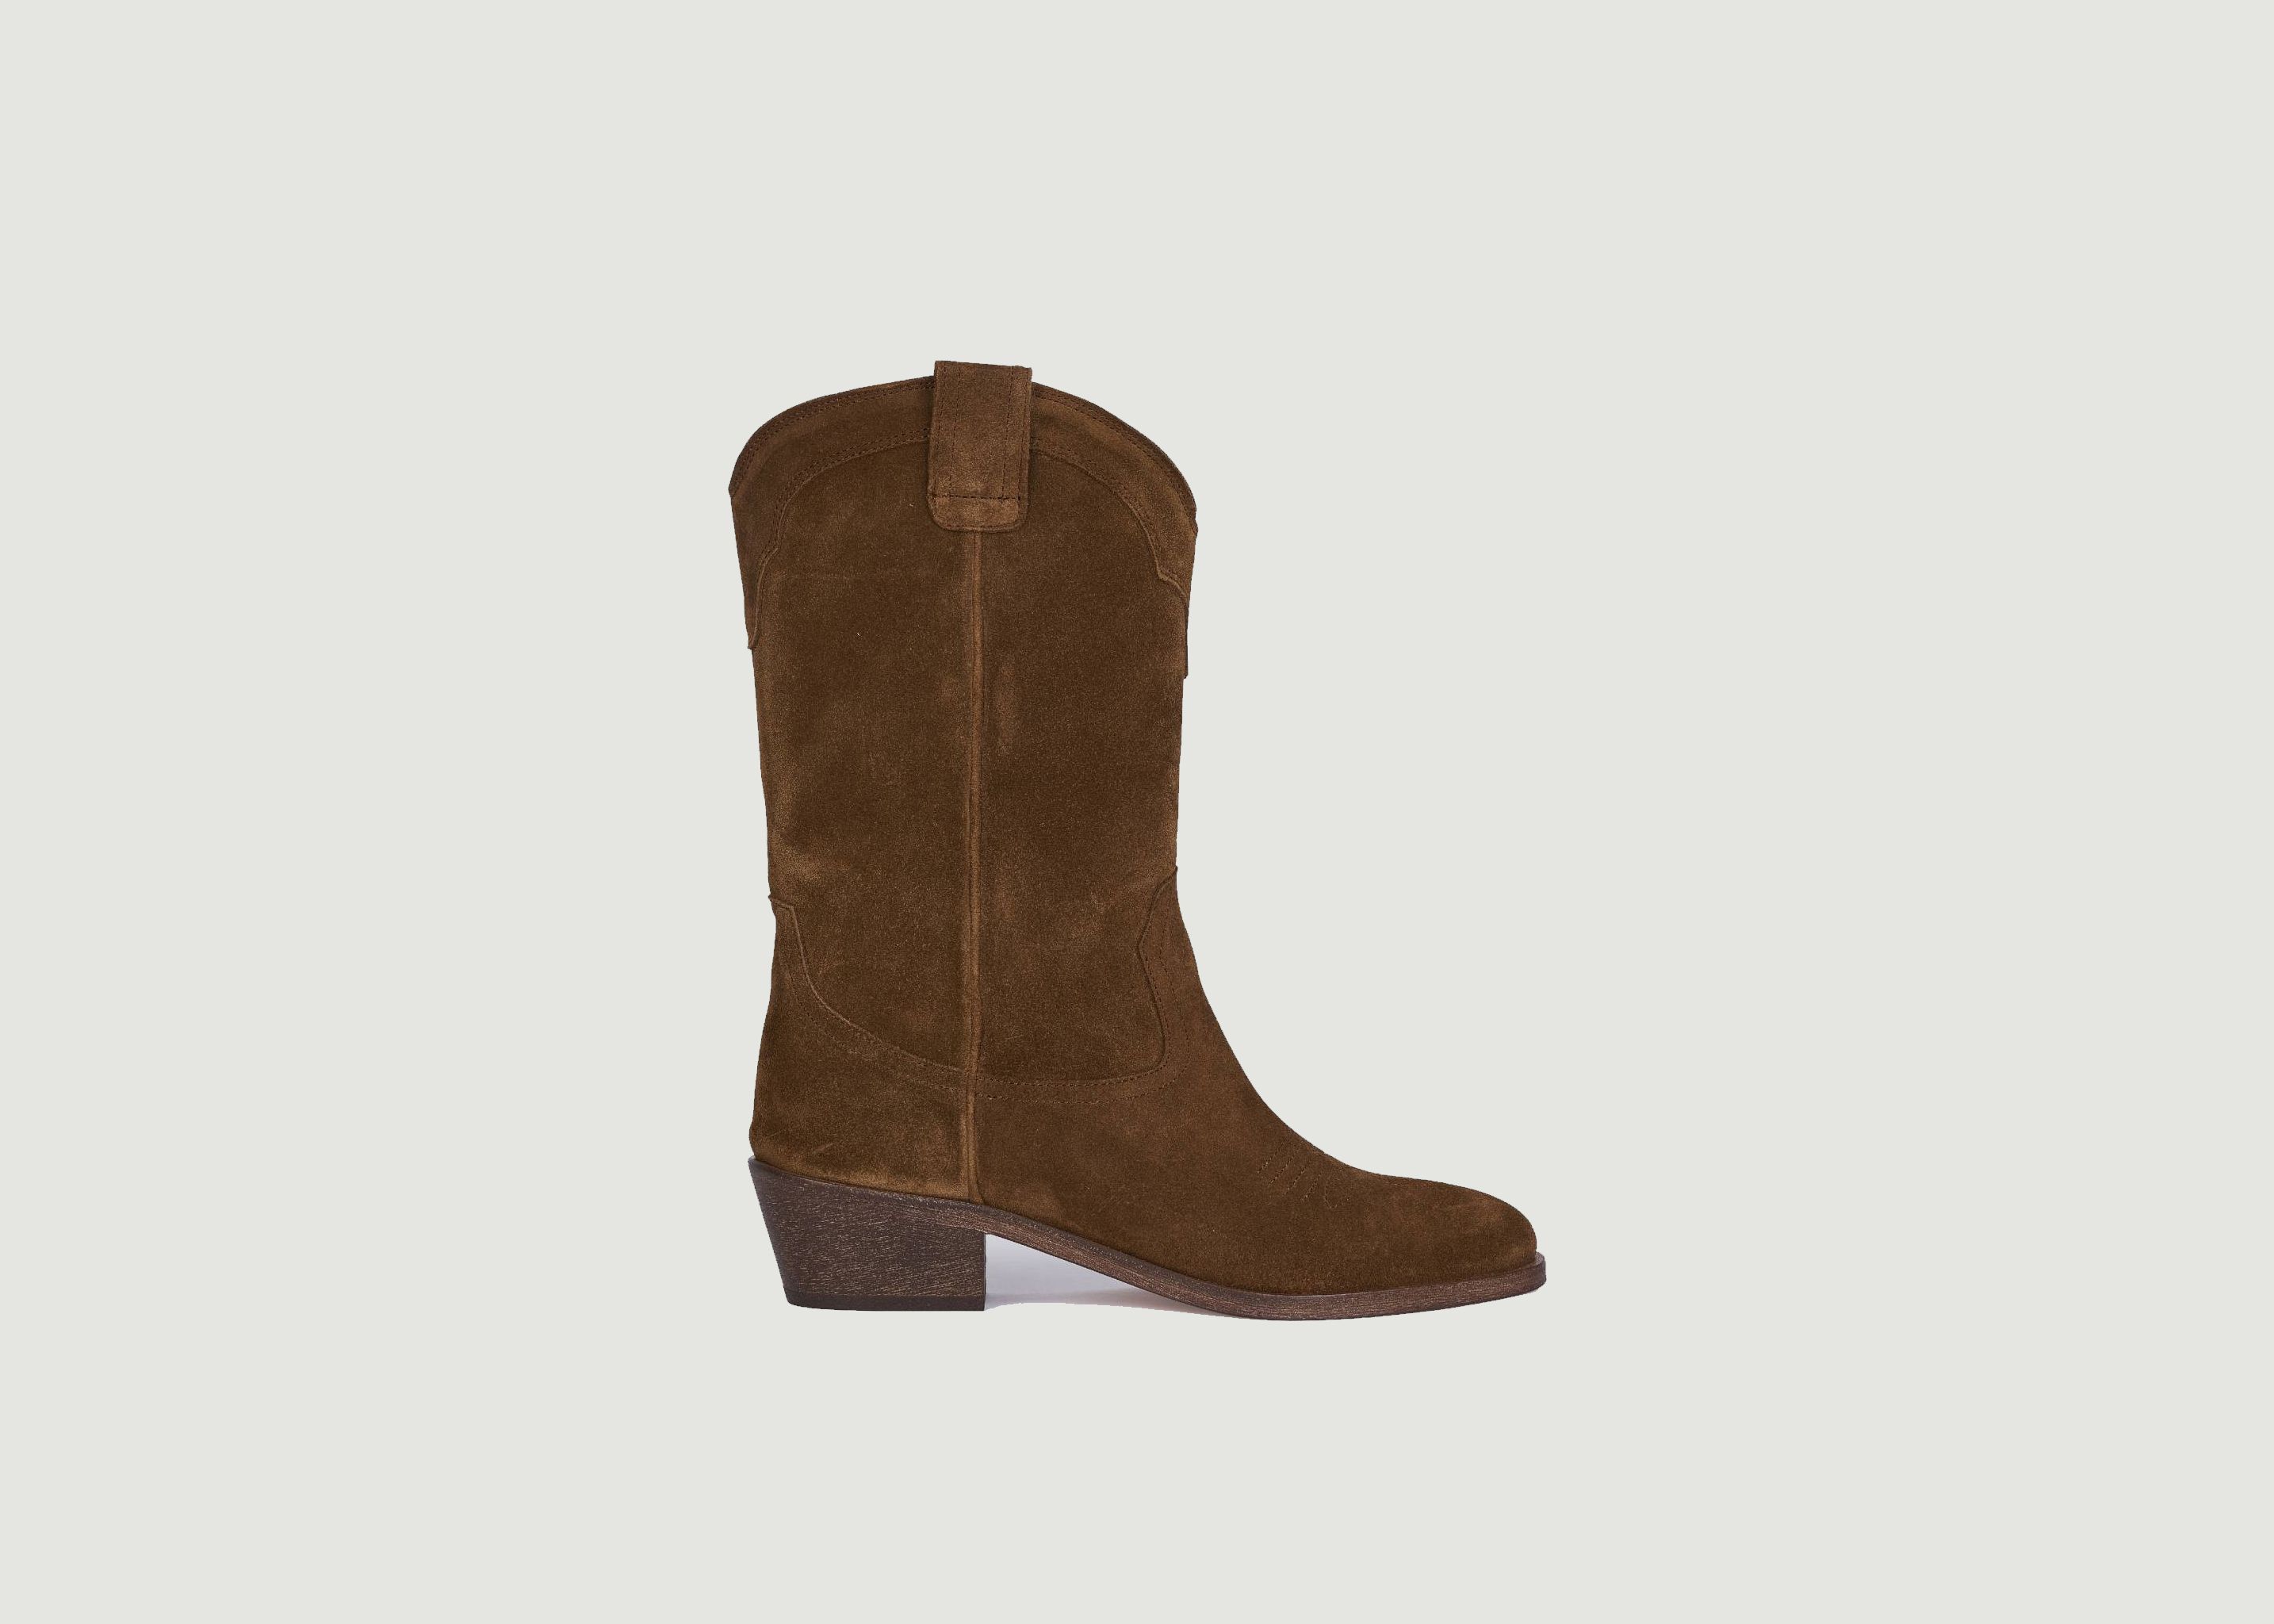 Welson suede leather boots - Anthology Paris